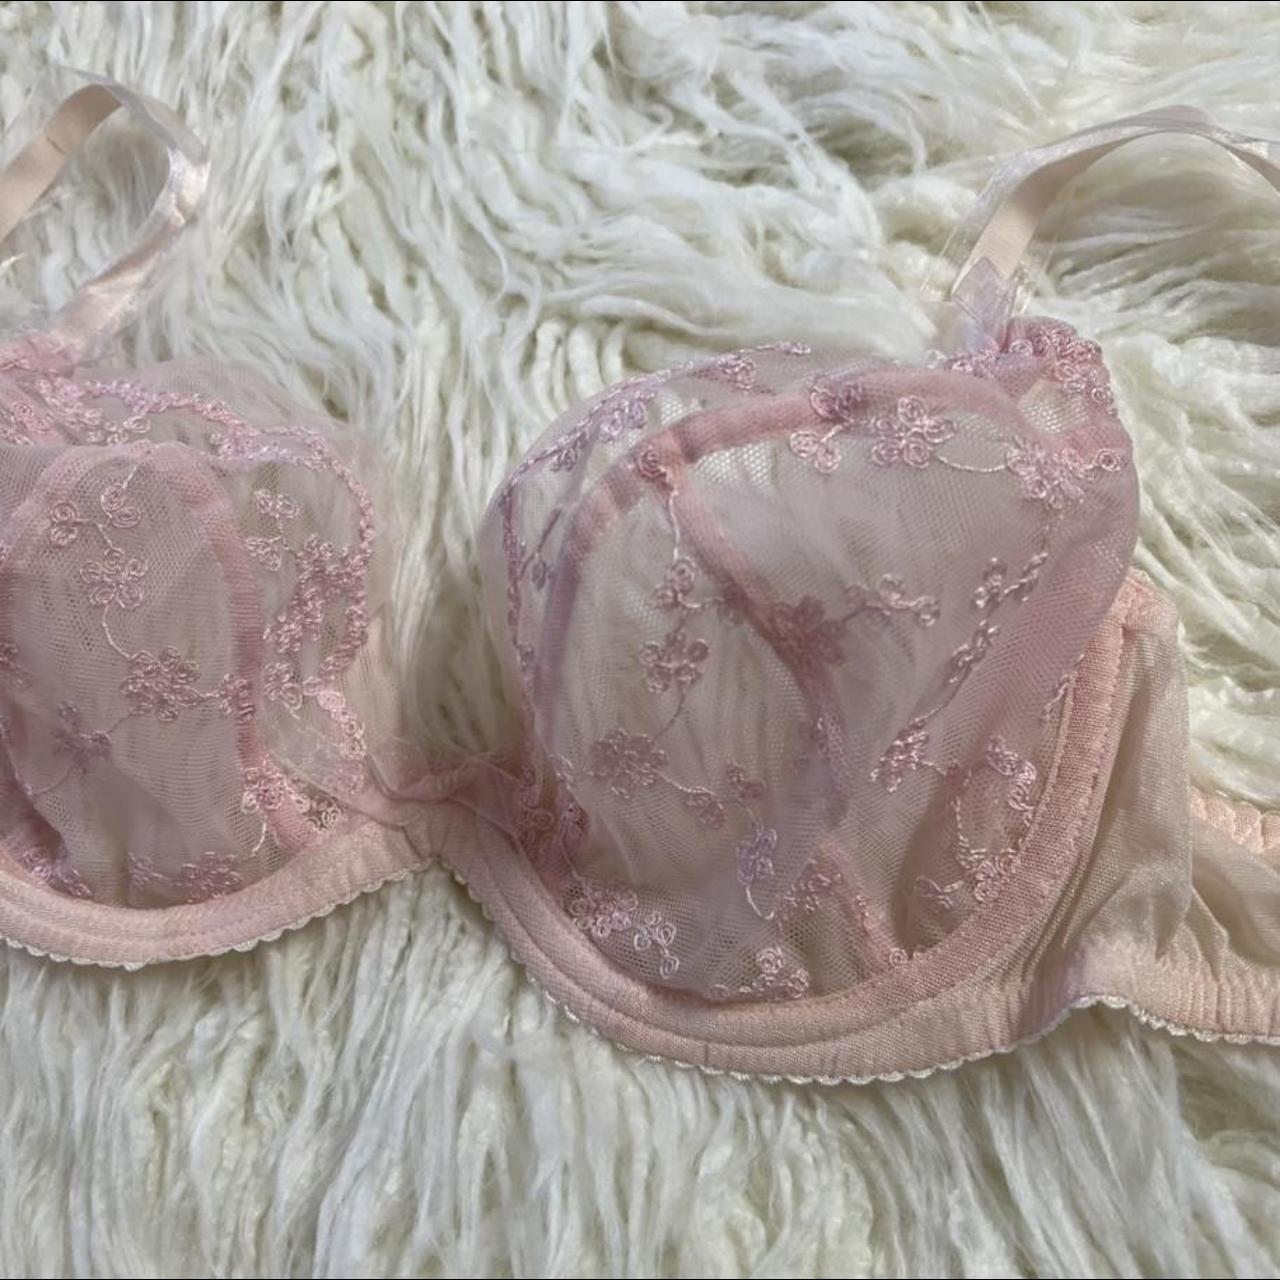 Product Image 2 - Dainty pink mesh bra with